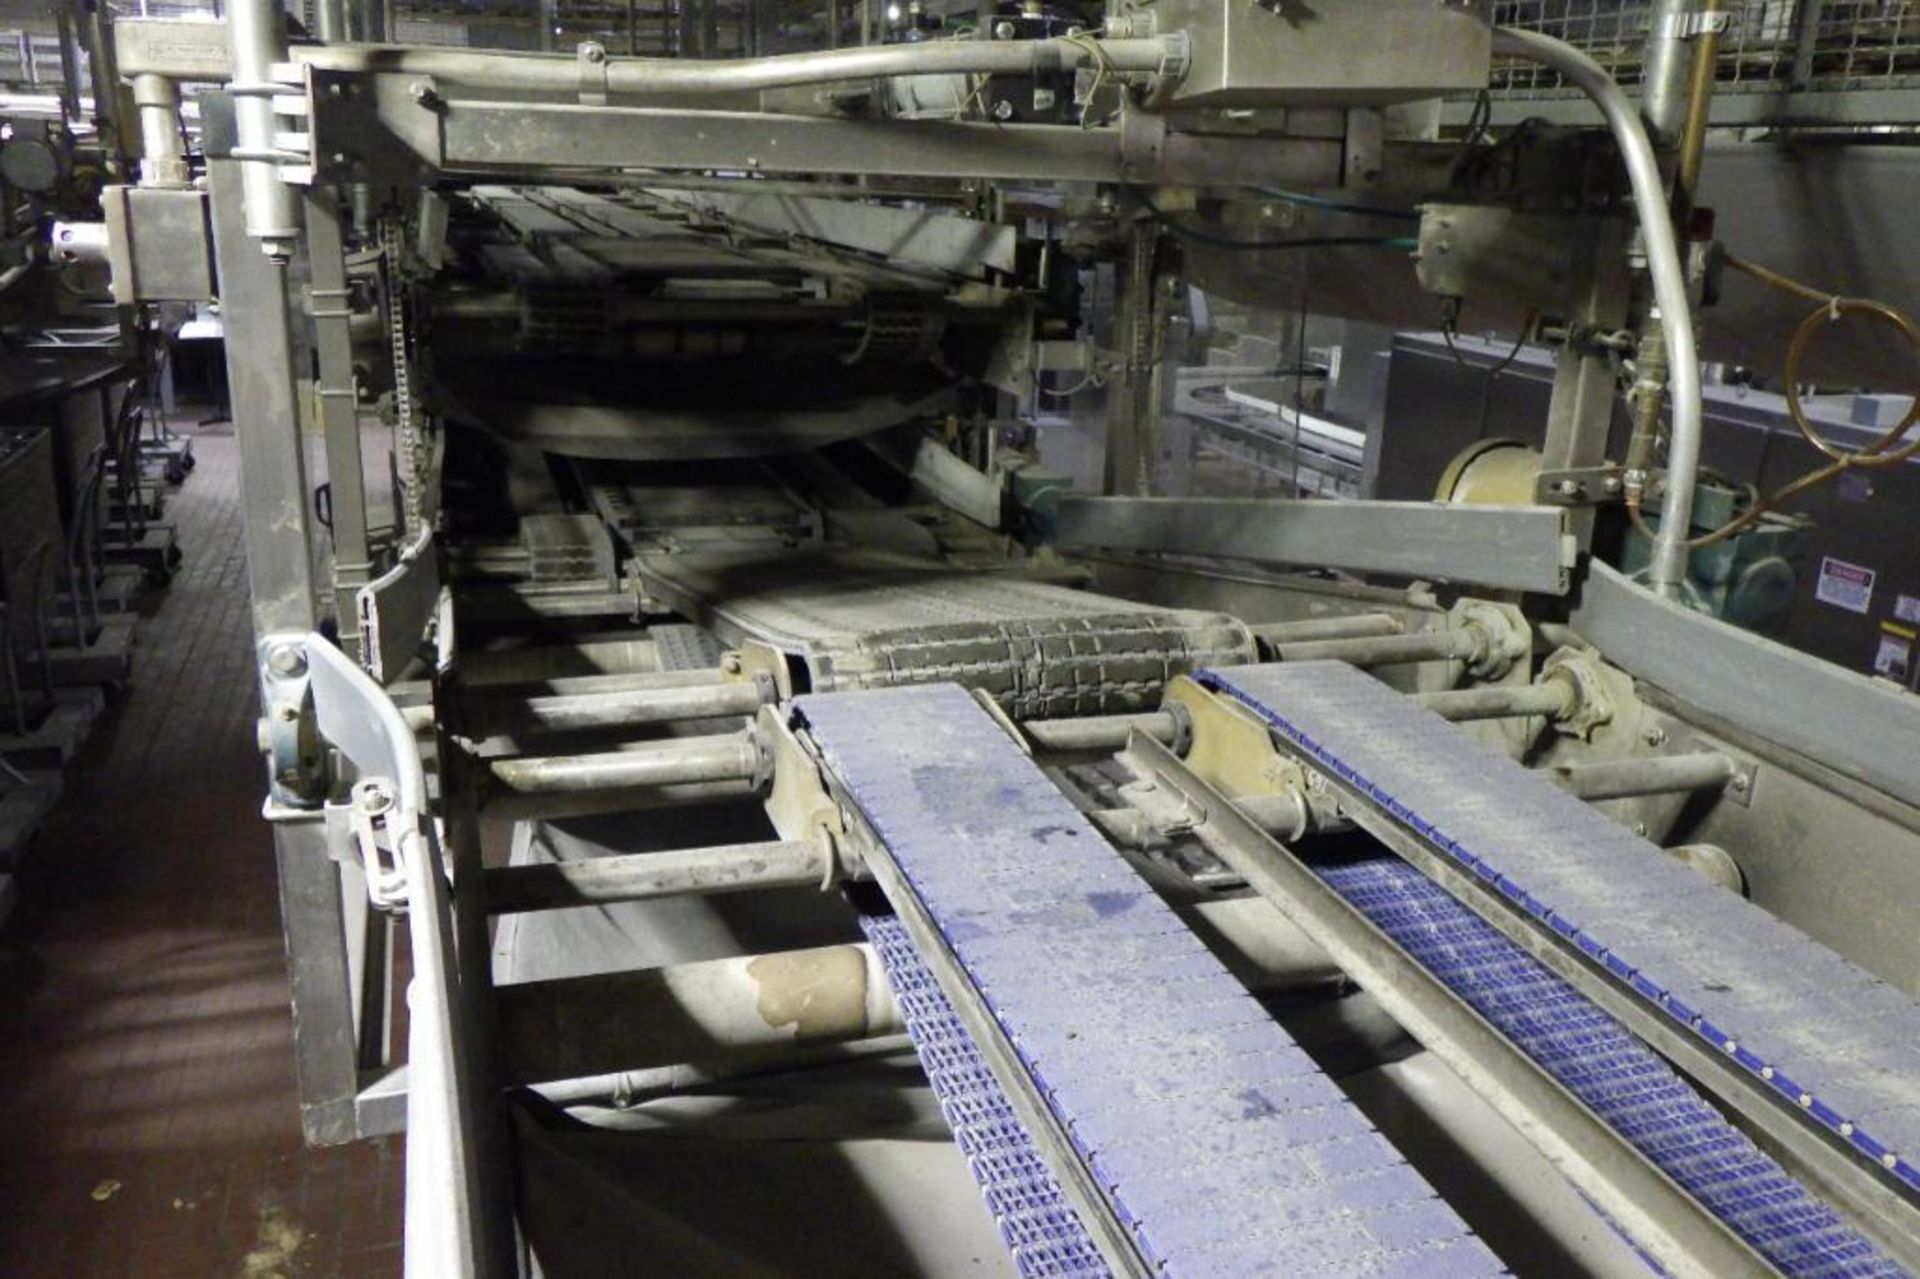 Stewart systems empty pan conveyor - Image 23 of 27